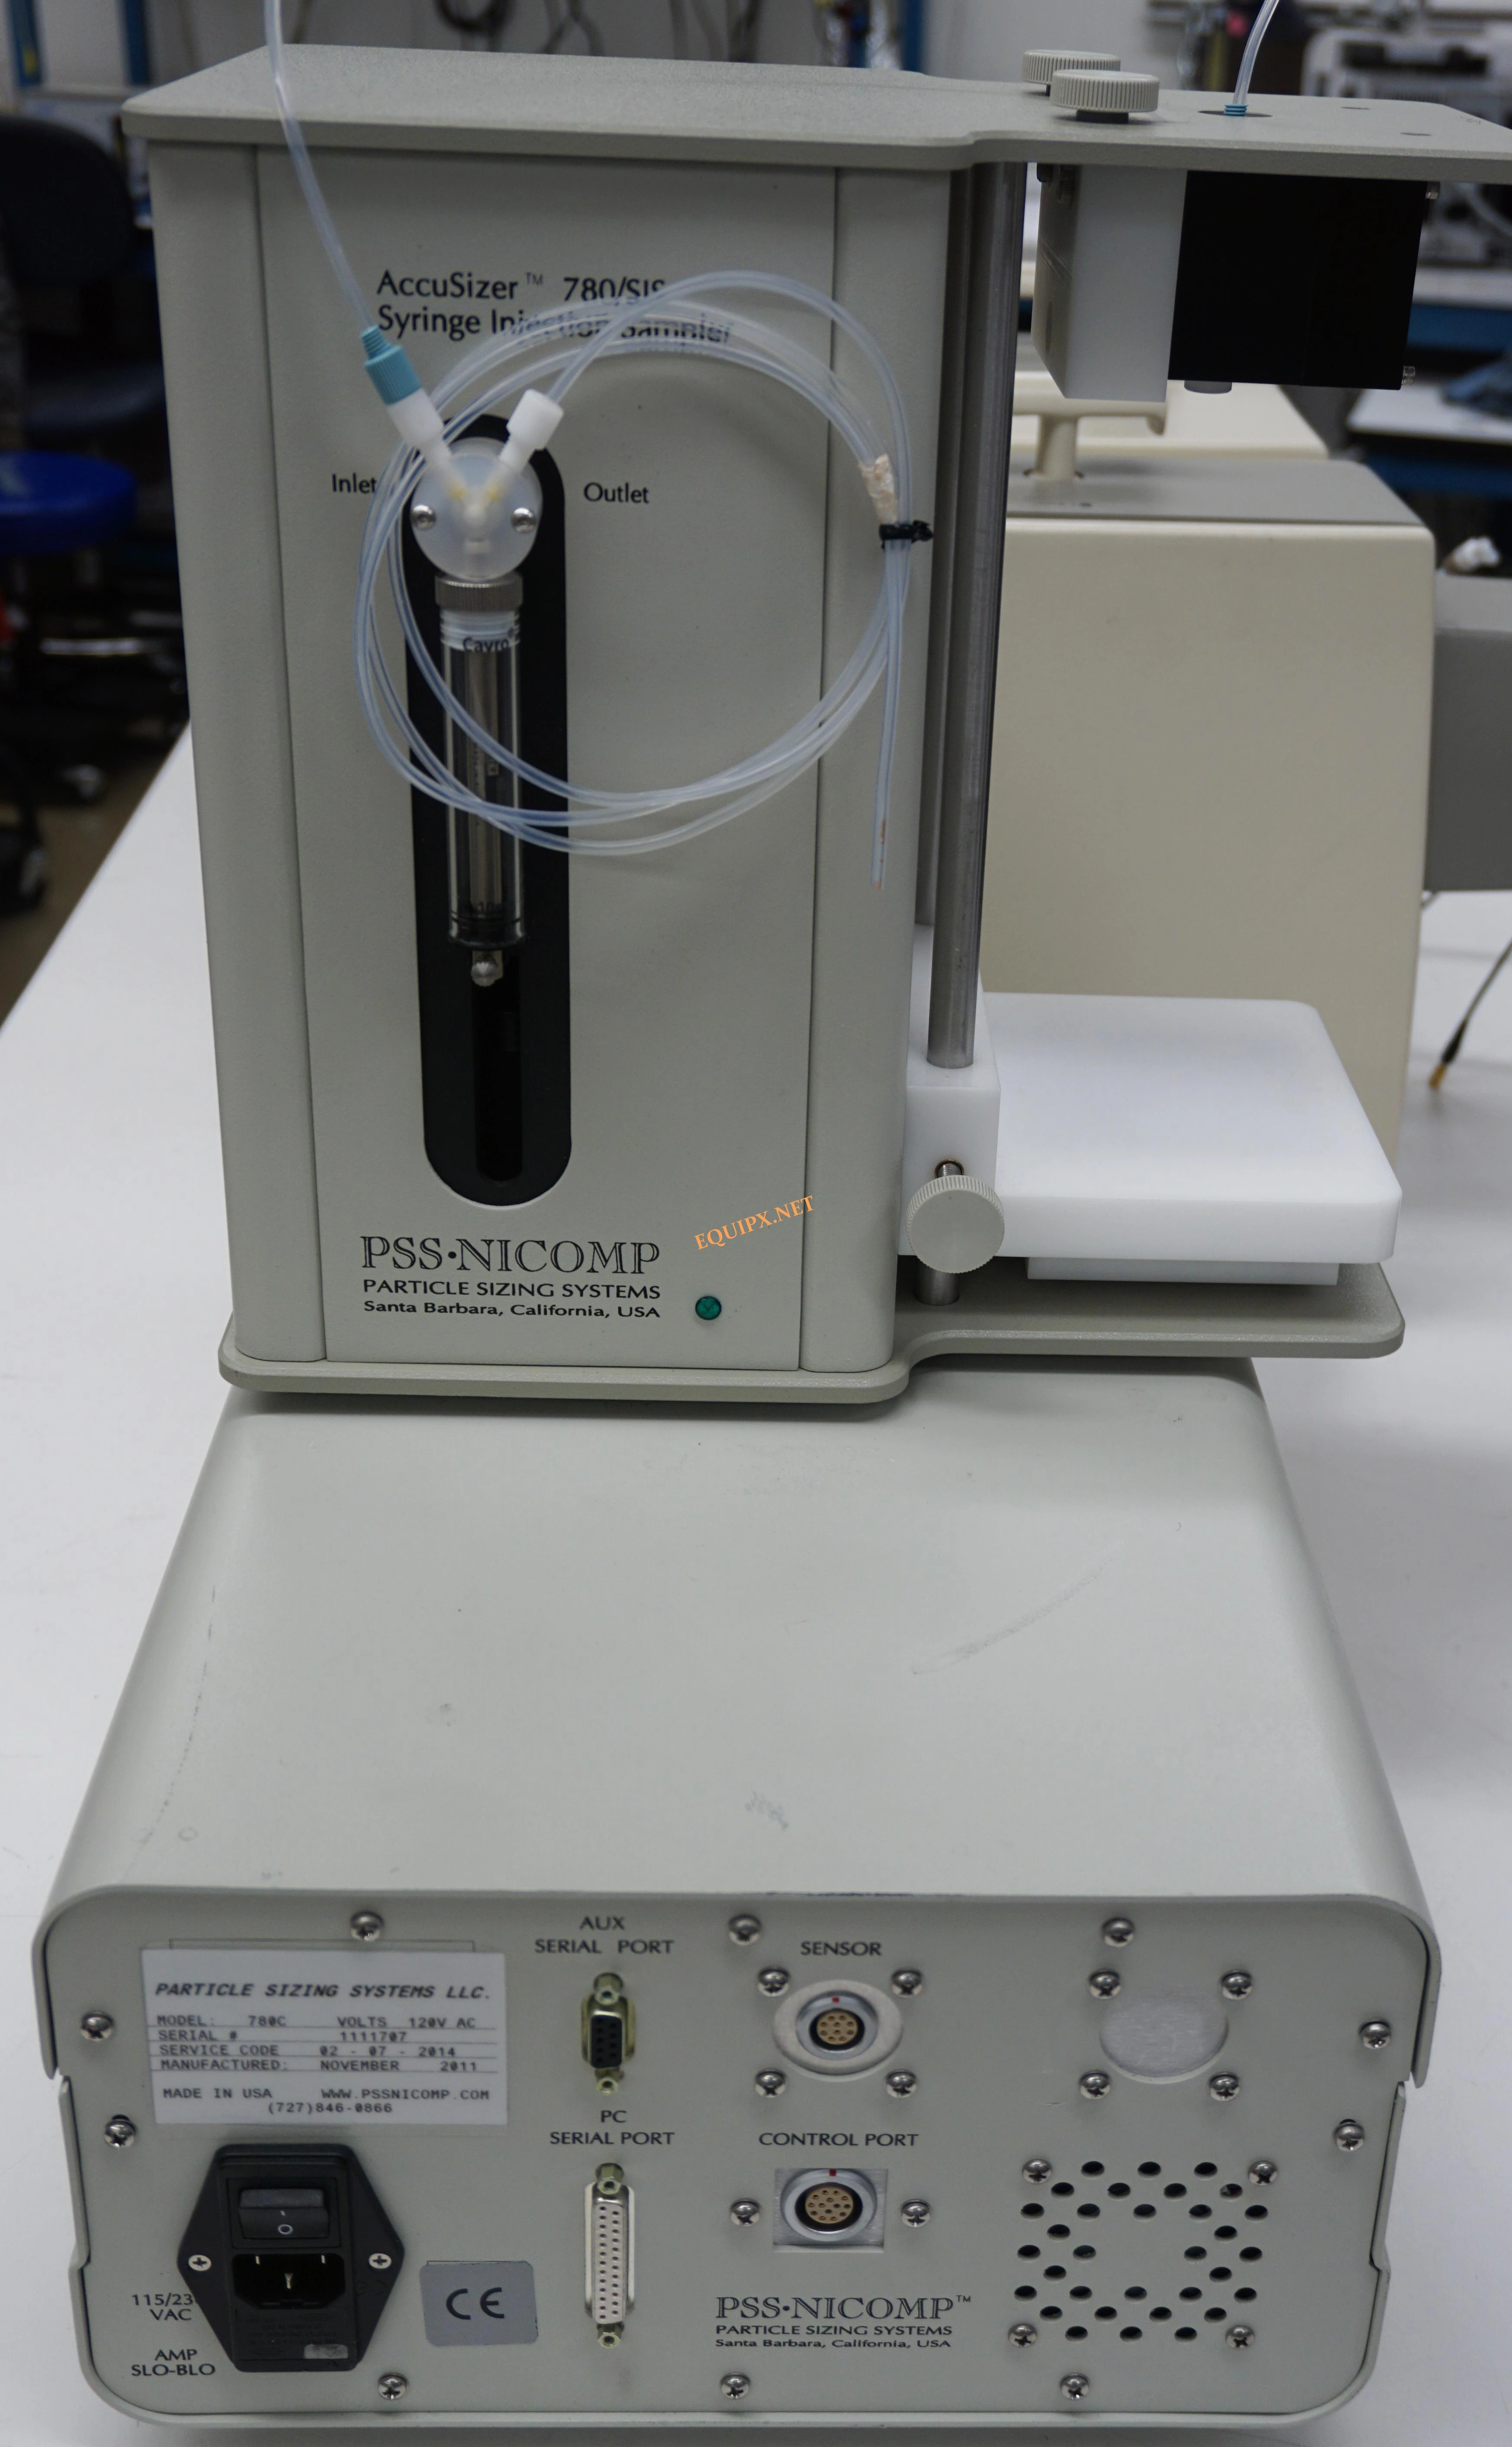 PSS Particle sizing systems 780C, SIS, LE-400 detector 0.5-400 microns (4197)